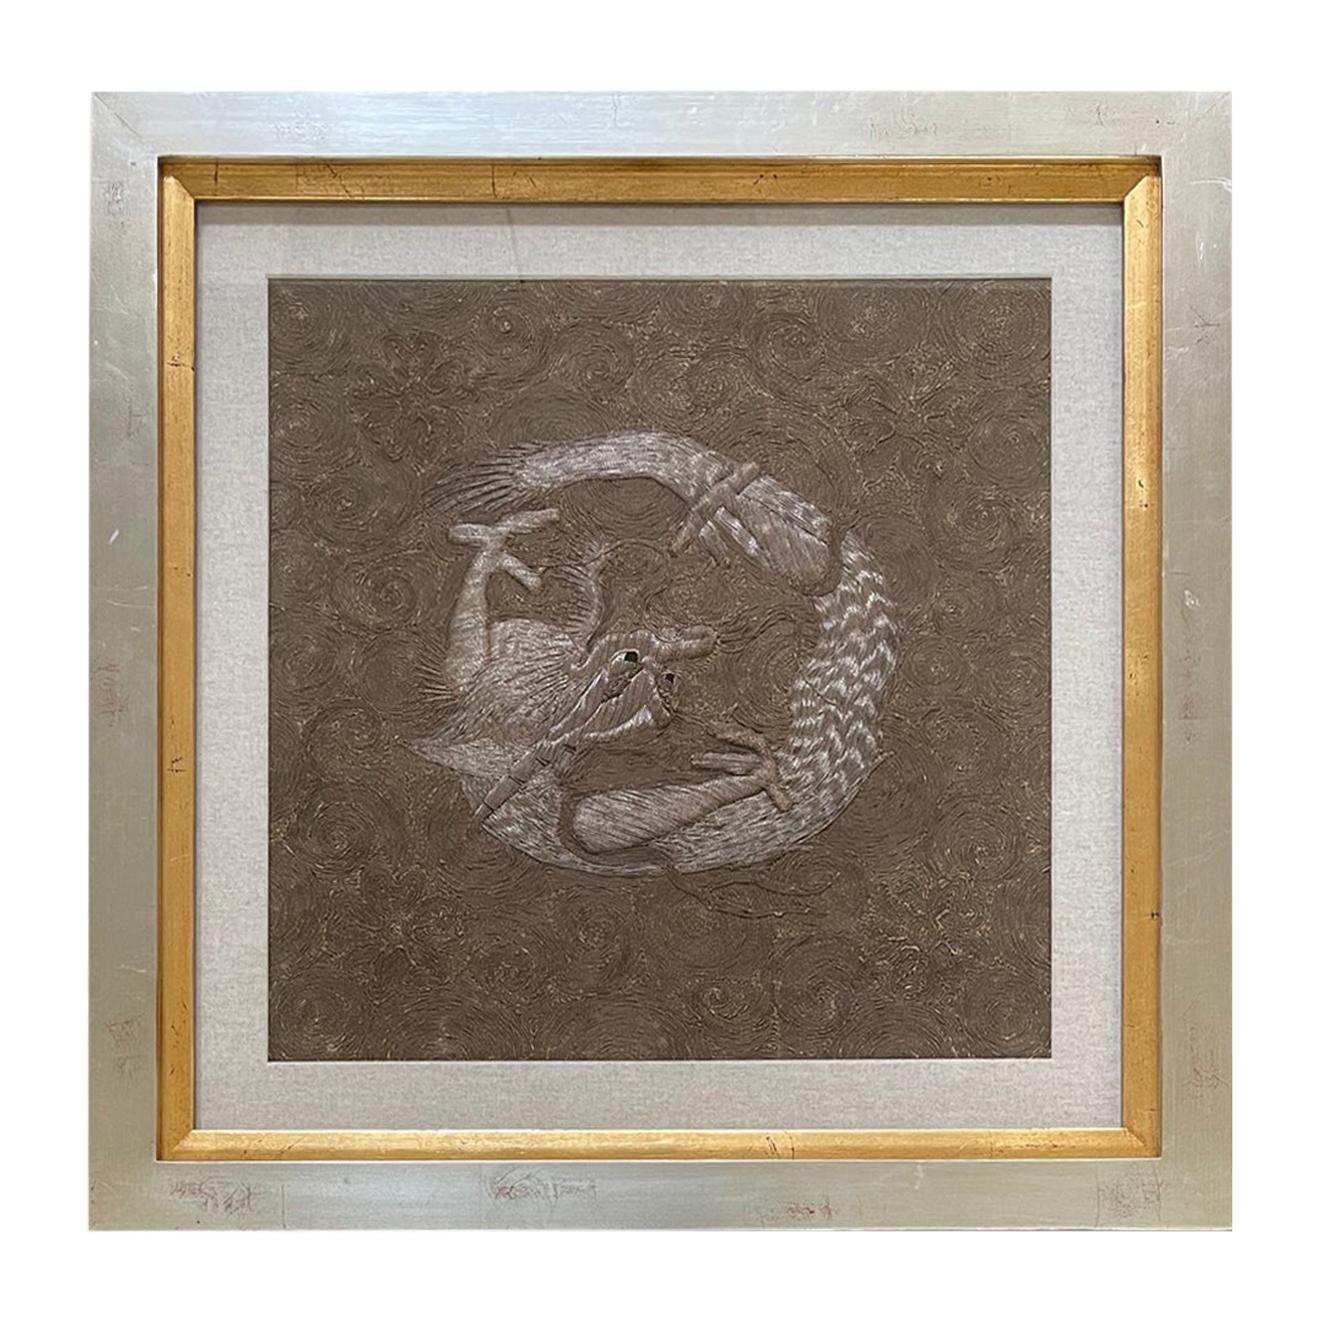 Framed Japanese Relief Embroidery Textile Art of Dragon